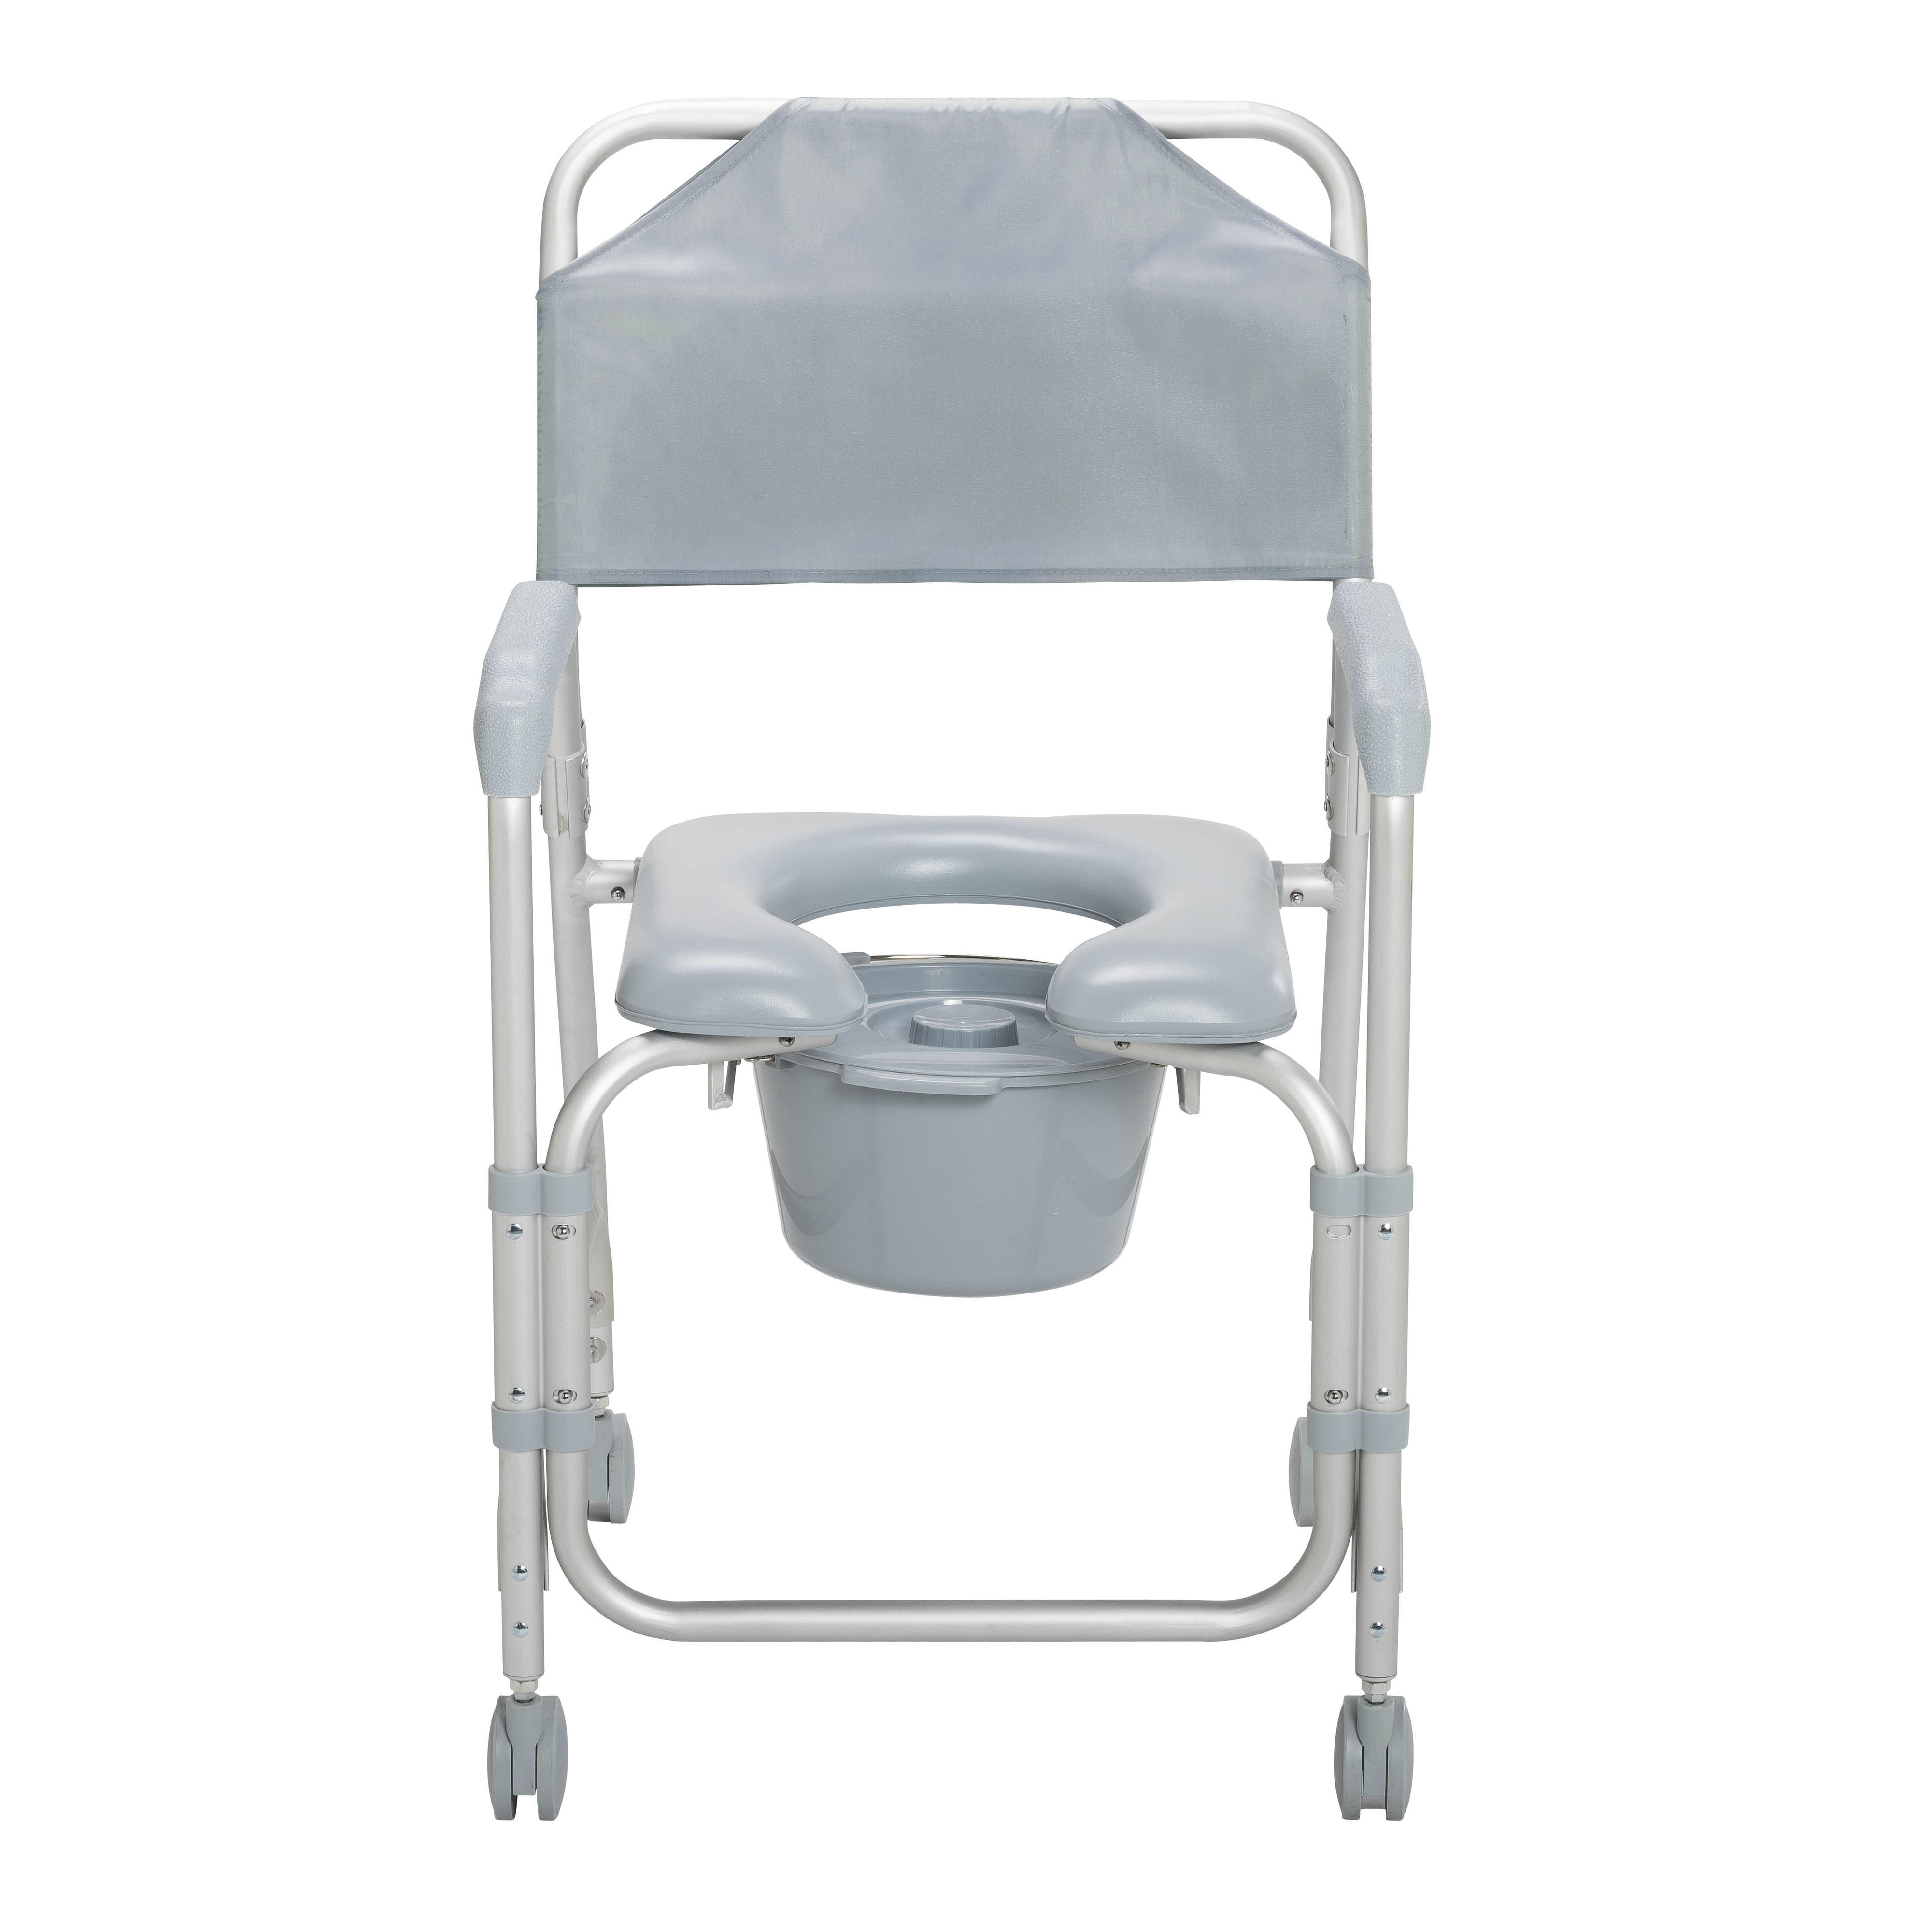 Buy Drive Medical Lightweight Portable Shower Commode Chair With Casters Online In Taiwan 21027821